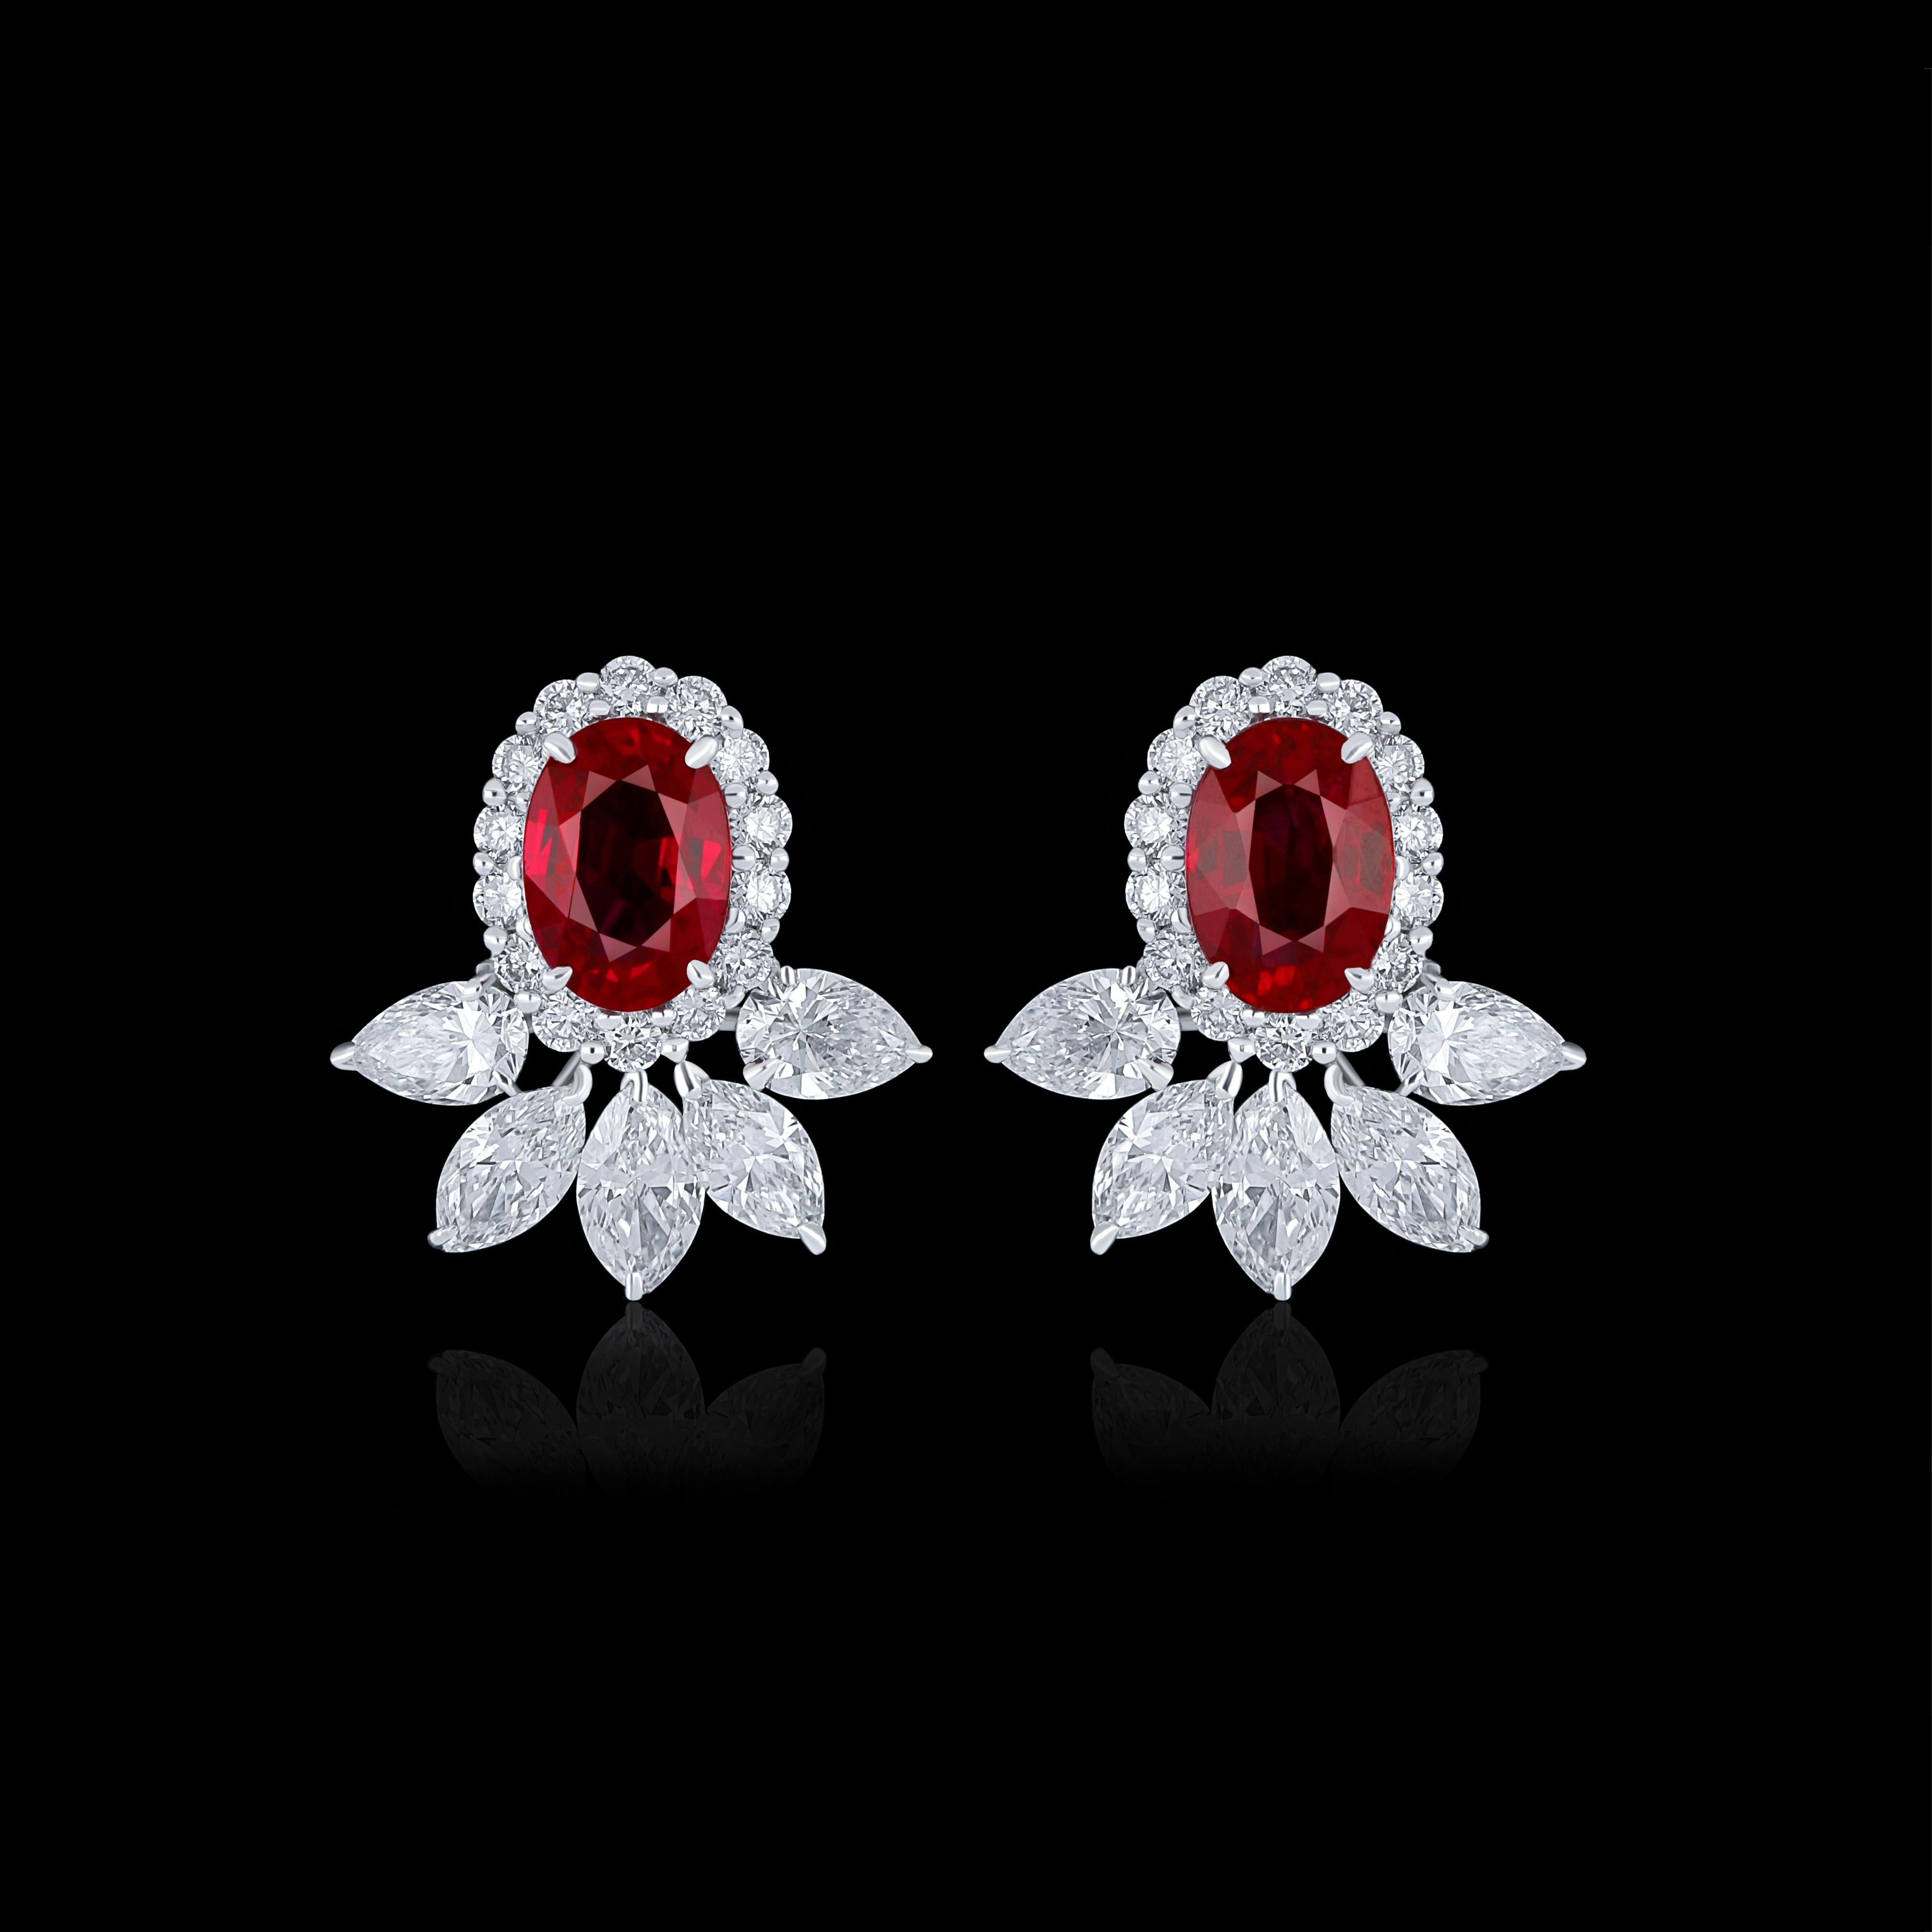 Elegant and exquisitely detailed 18 Karat White Gold Earrings, center set with 1.32Cts .Oval Shape vibrant Red Mozambique Ruby and micro pave set Diamonds, weighing approx. 1.14Cts Beautifully Hand crafted in 18 Karat White Gold.

Stone Detail:
Ruby